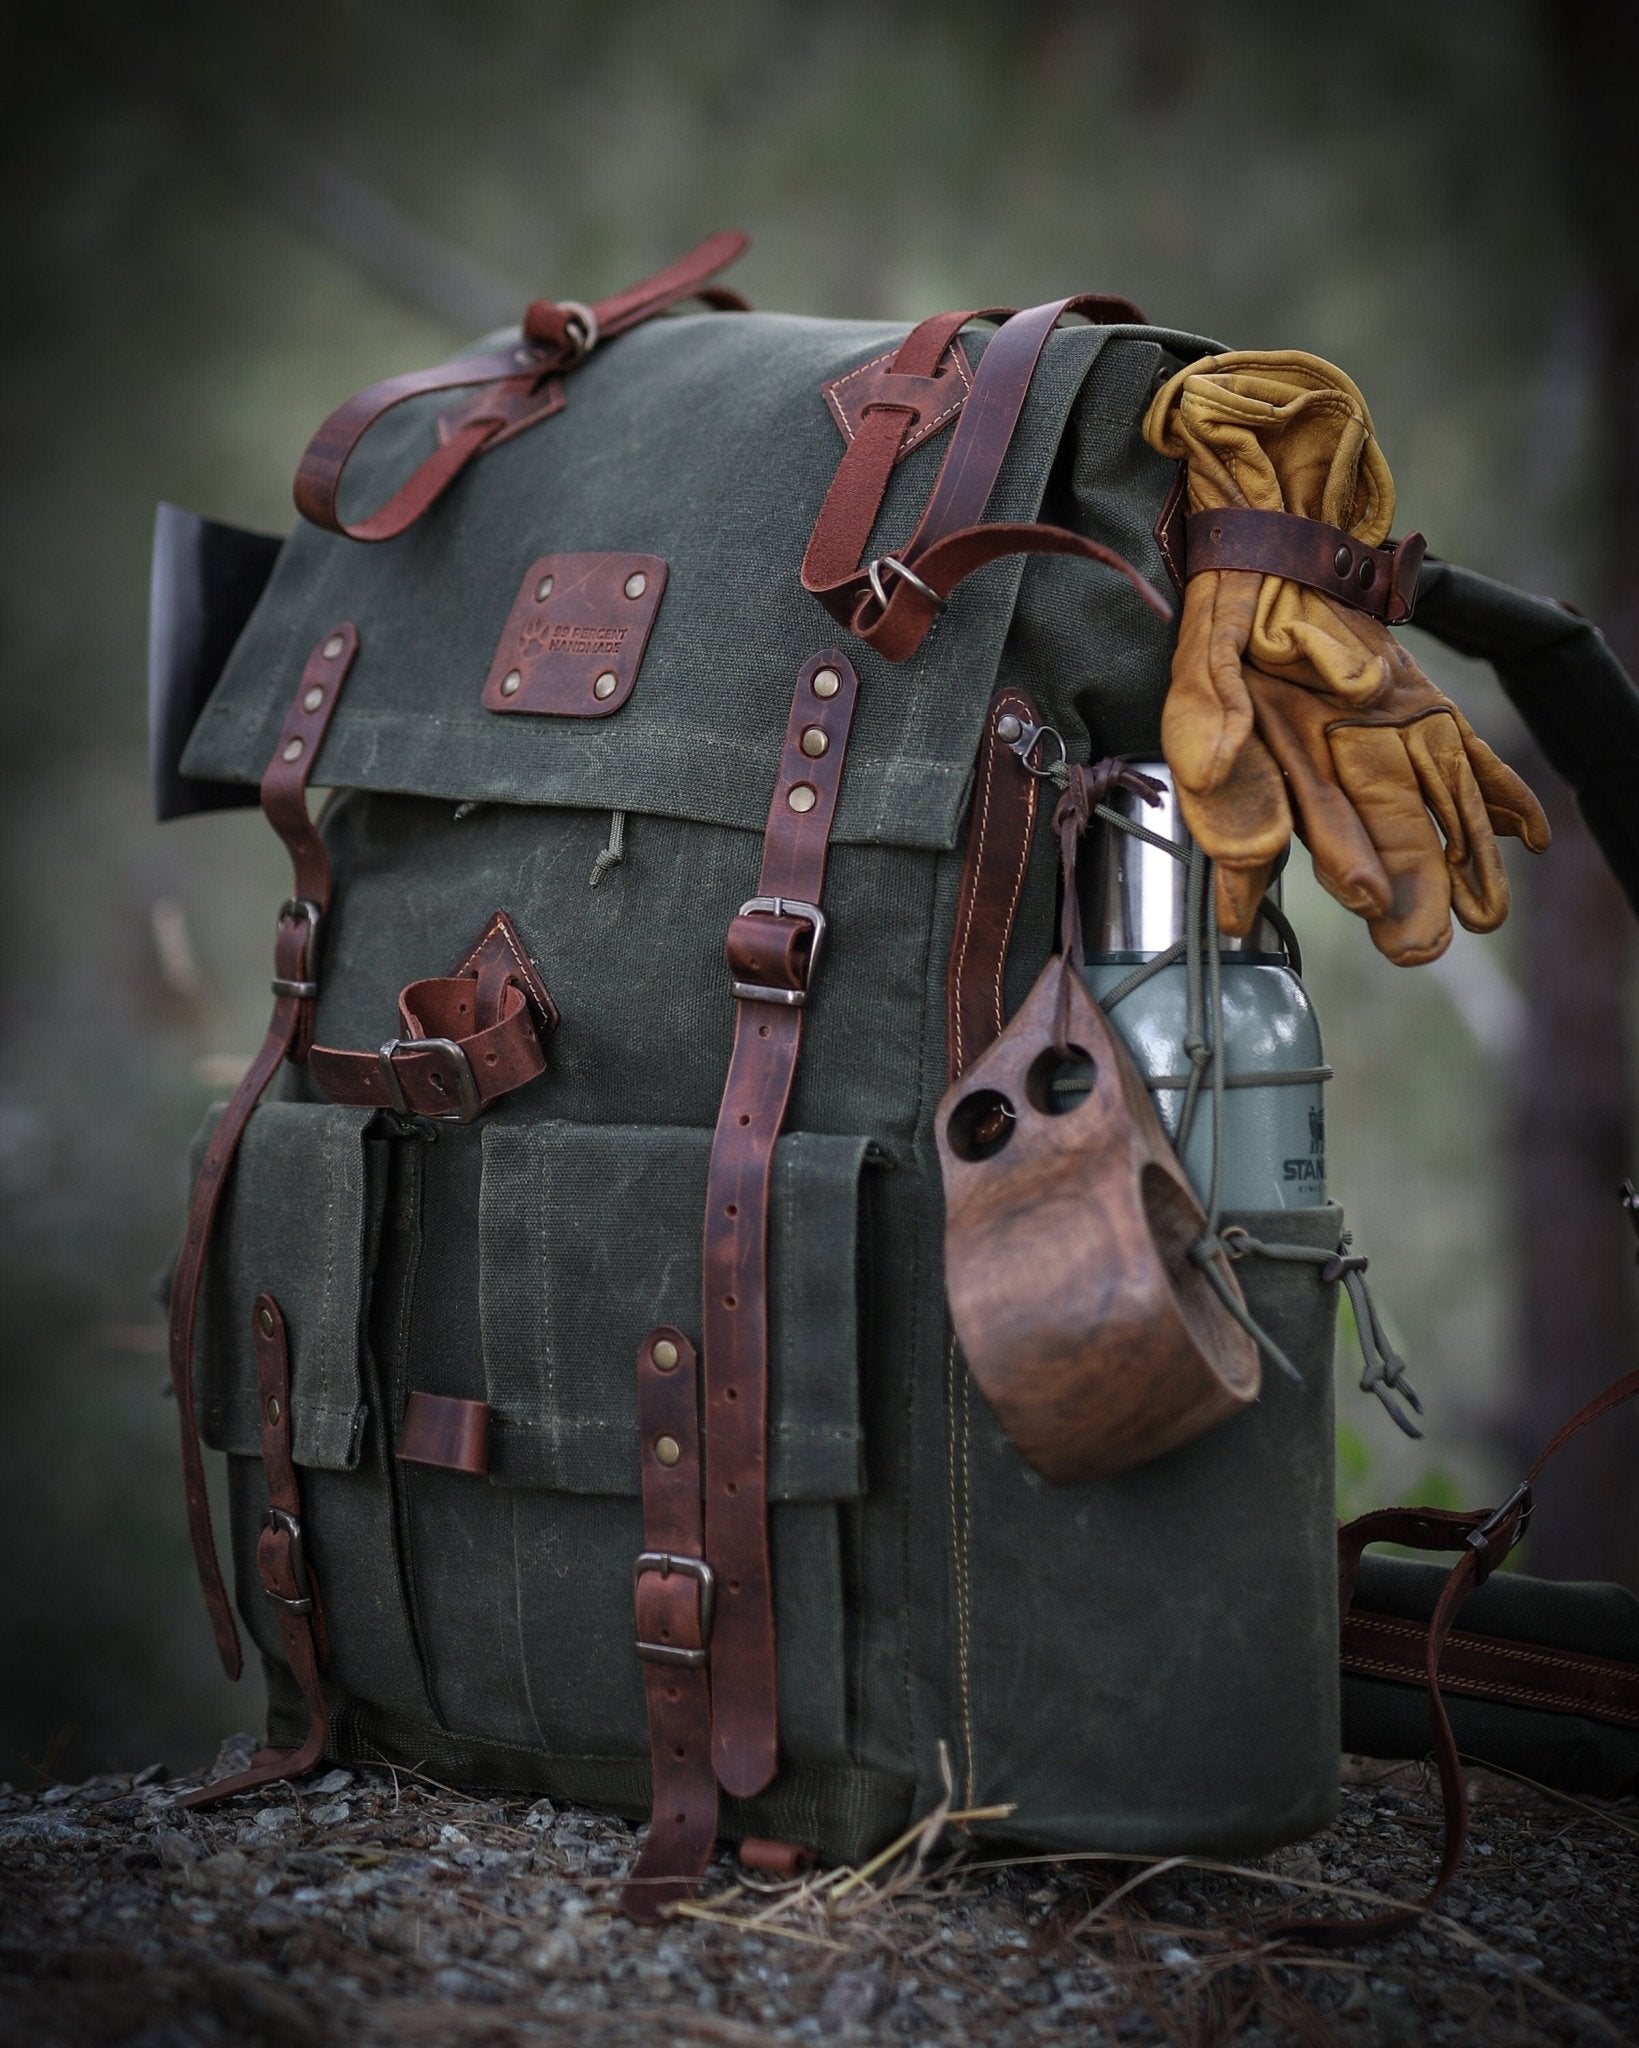 Only 12 Pieces With 3 Colour, Handmade Leather and Waxed Canvas Backpack for Travel, Camping | 50 Liter | Personalization  for your request bushcraft - camping - hiking backpack 99percenthandmade   